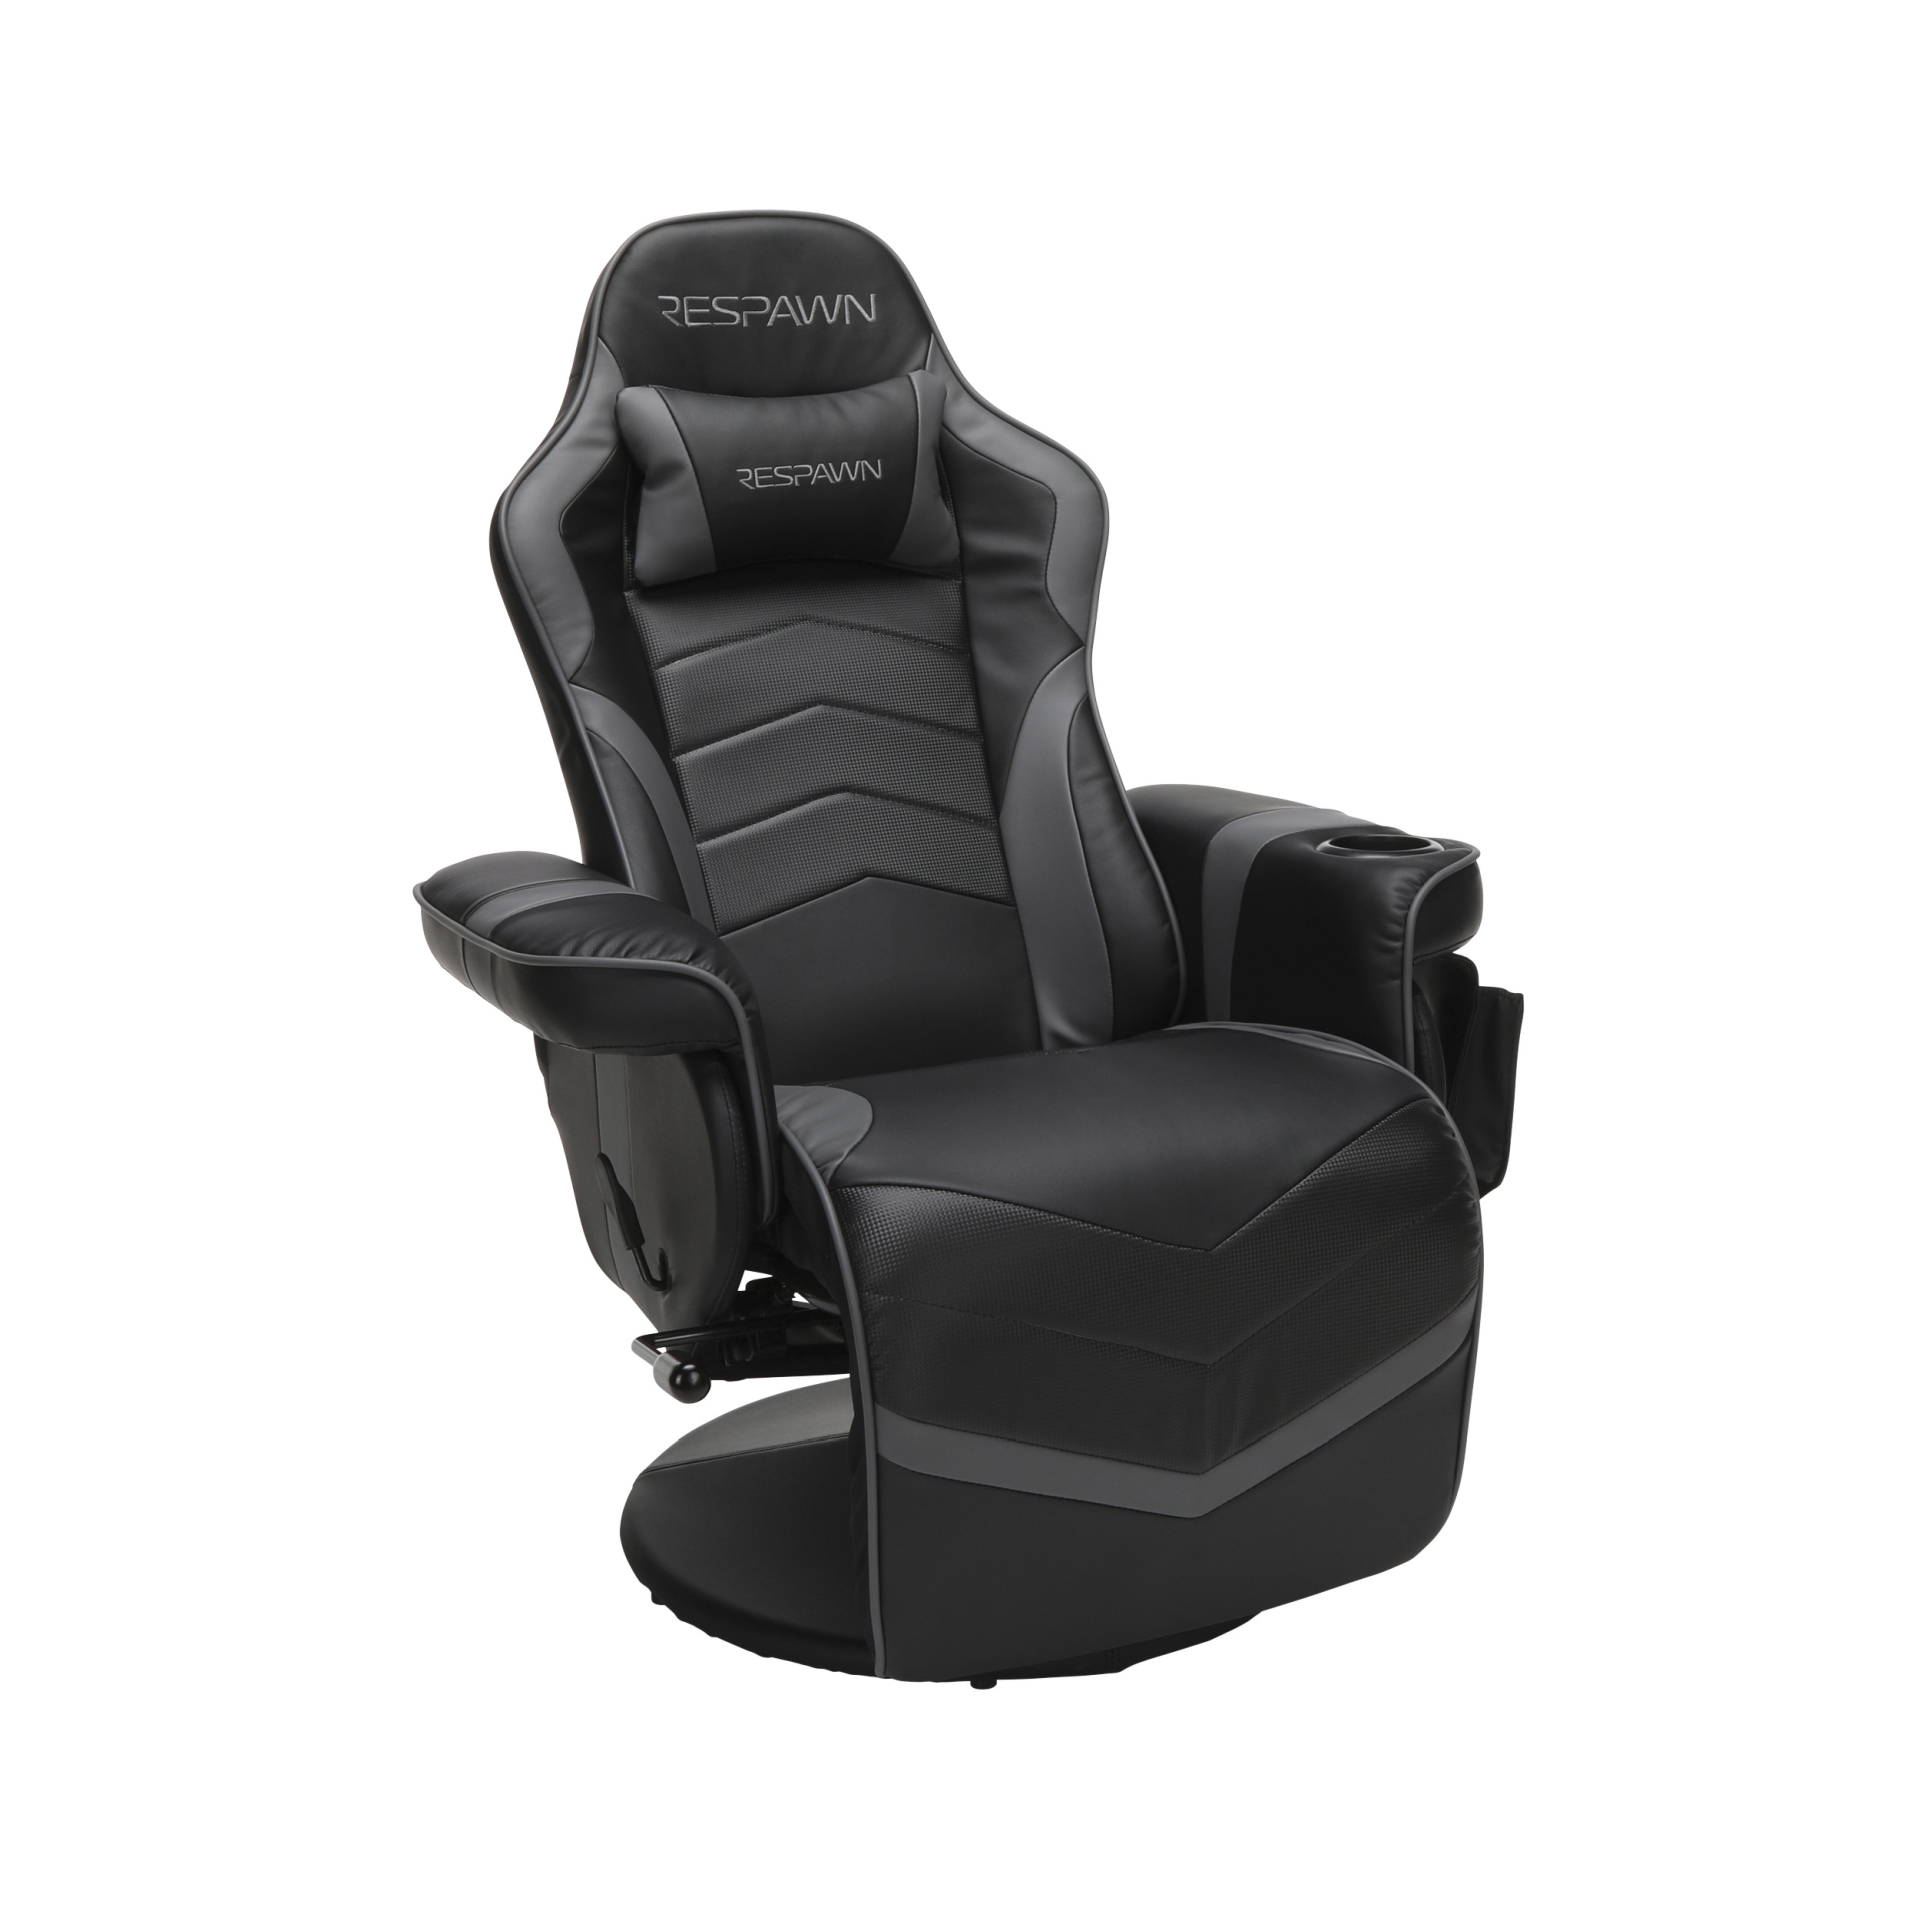 RESPAWN RSP-900 Gaming Recliner #17